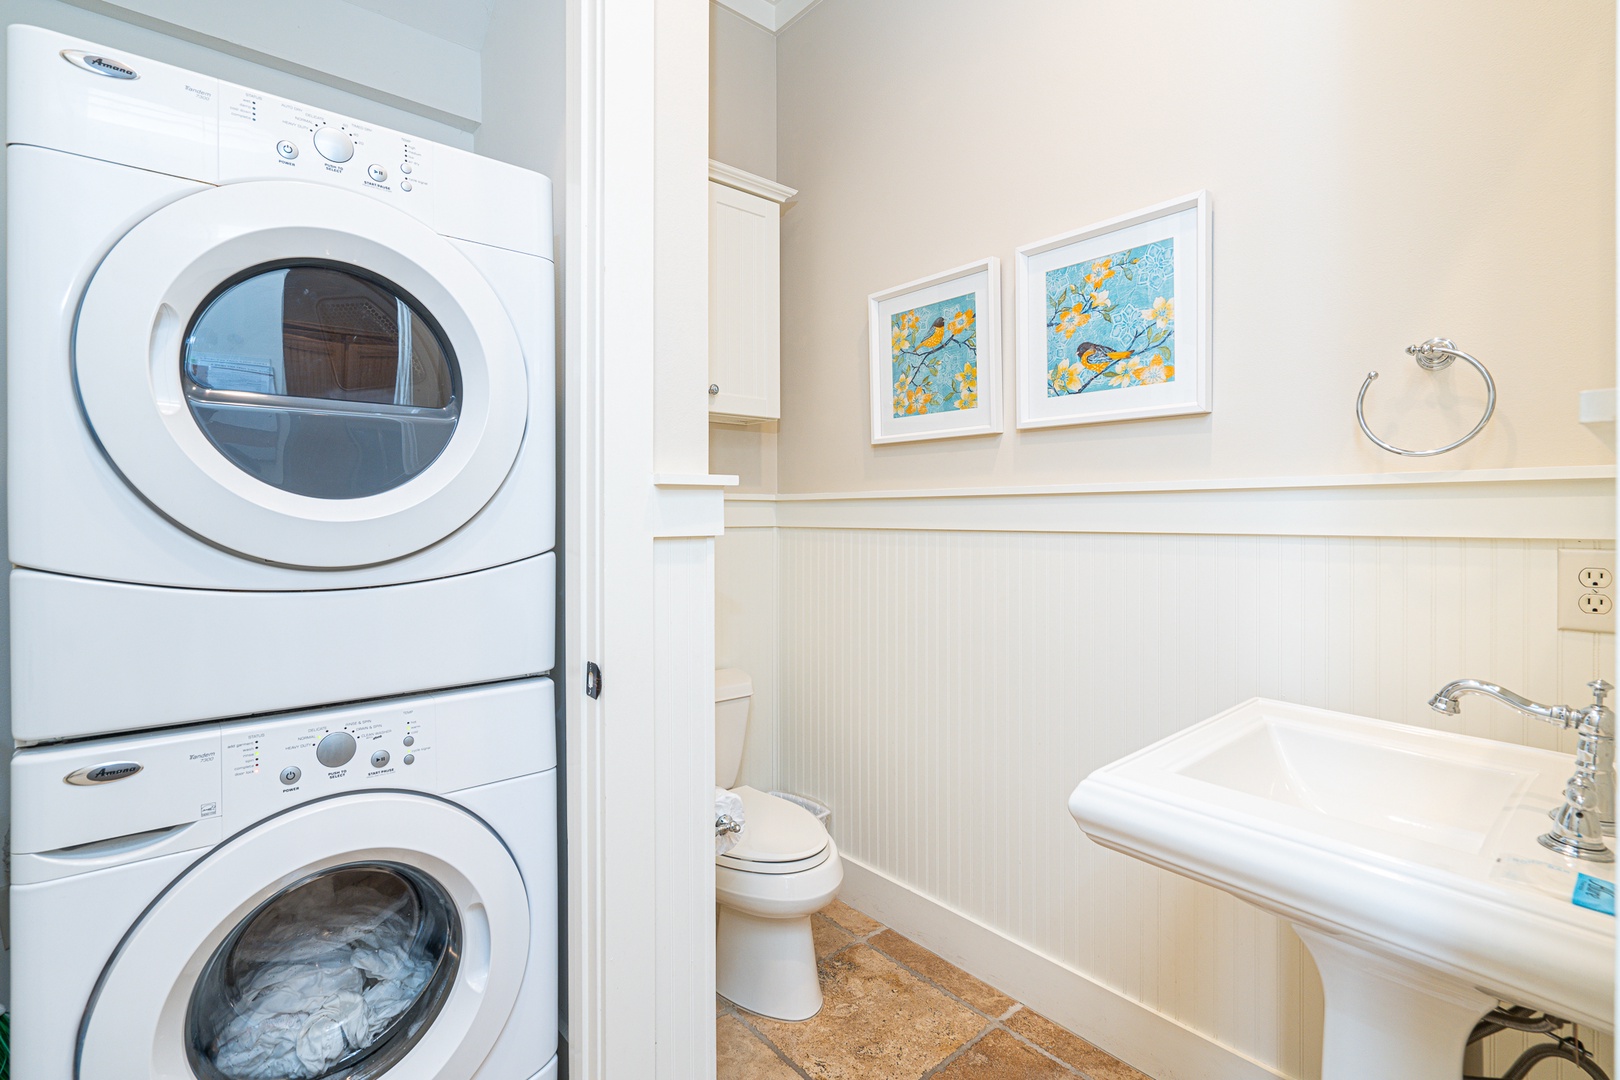 Private laundry is available for your stay, tucked away in the 1st-floor half bath